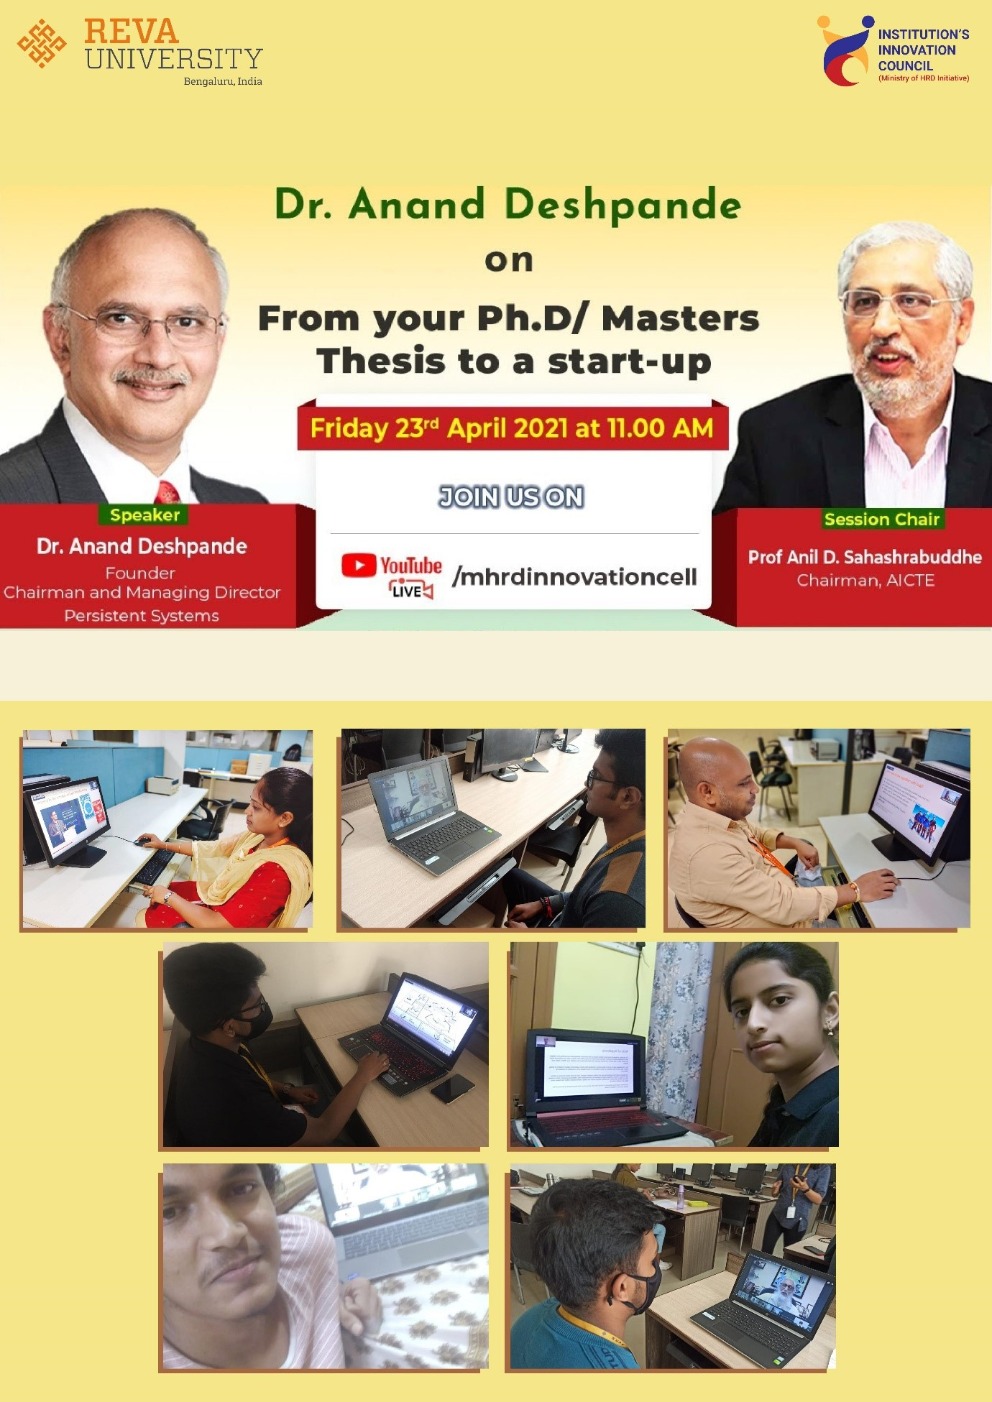 Dr. Anand Deshpande on your Ph.D/Masters Thesis to a start-up